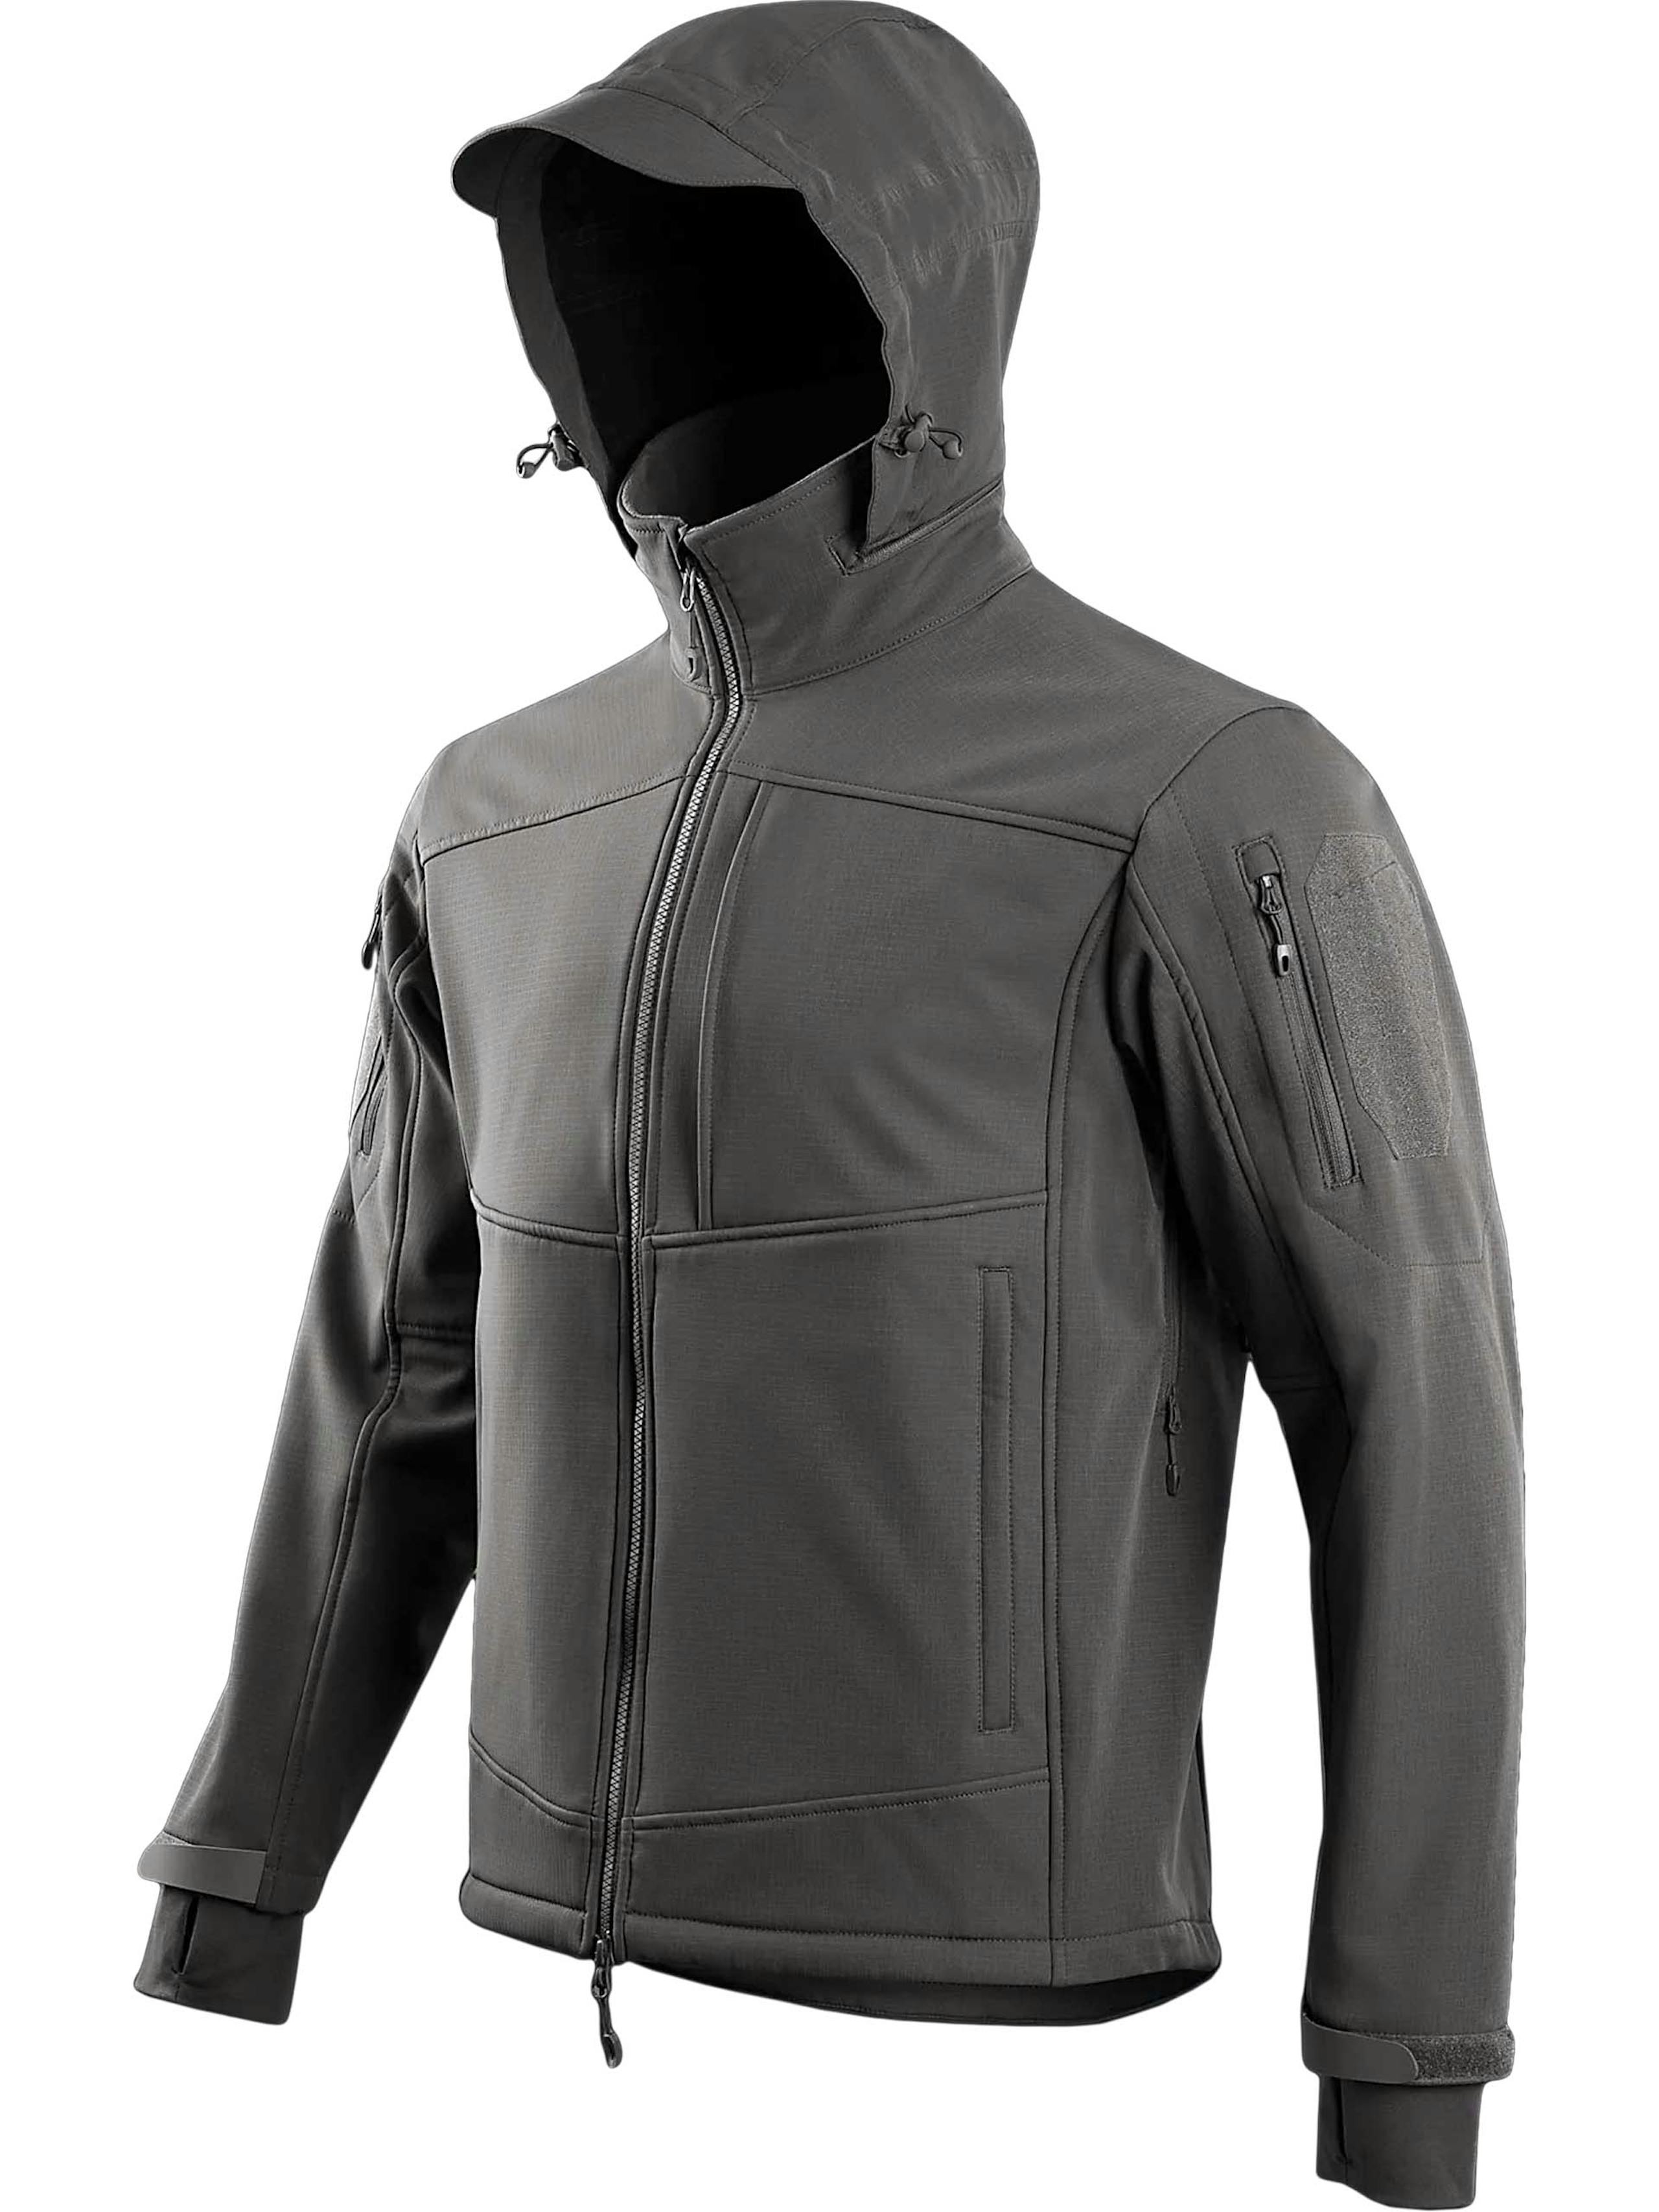 Highlander STOIRM Tactical Soft Shell Jacket - Grey with Hood up